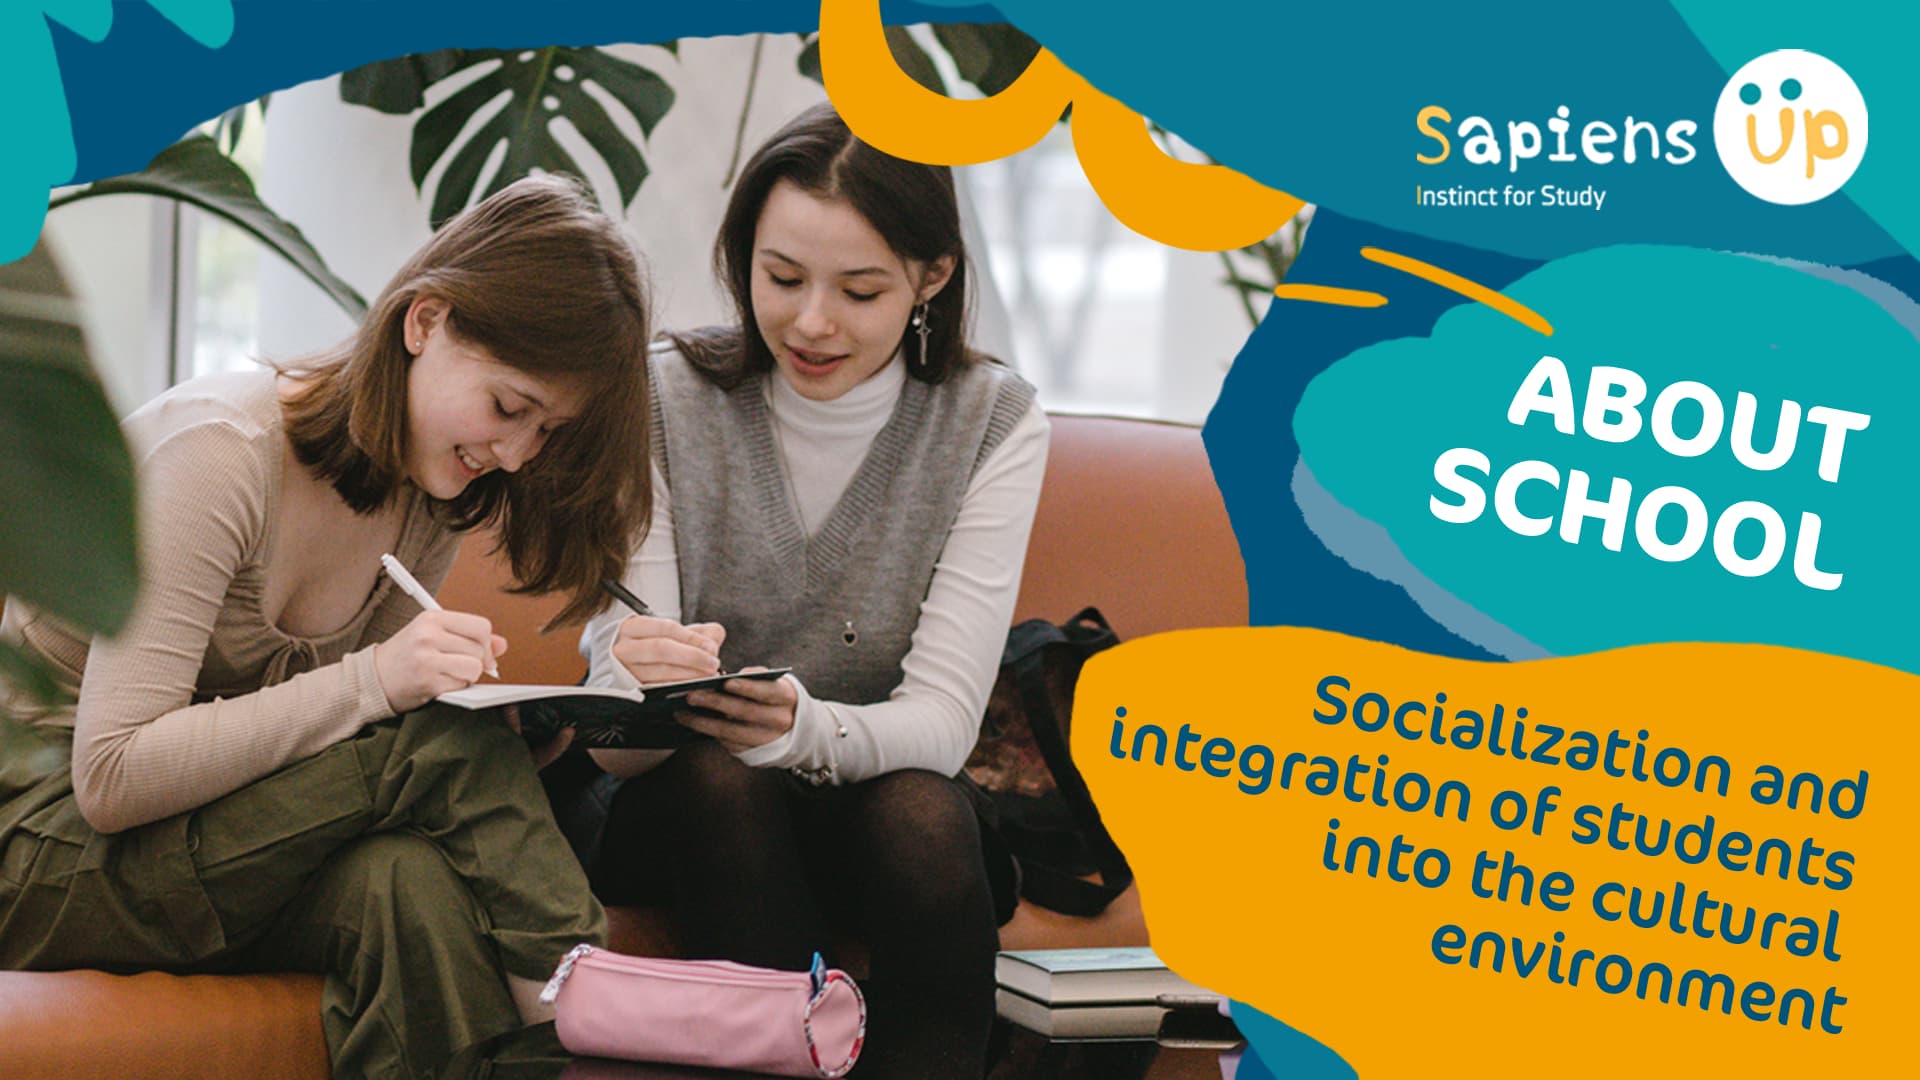 Socialization and integration of students into the cultural environment at Sapiens UP!